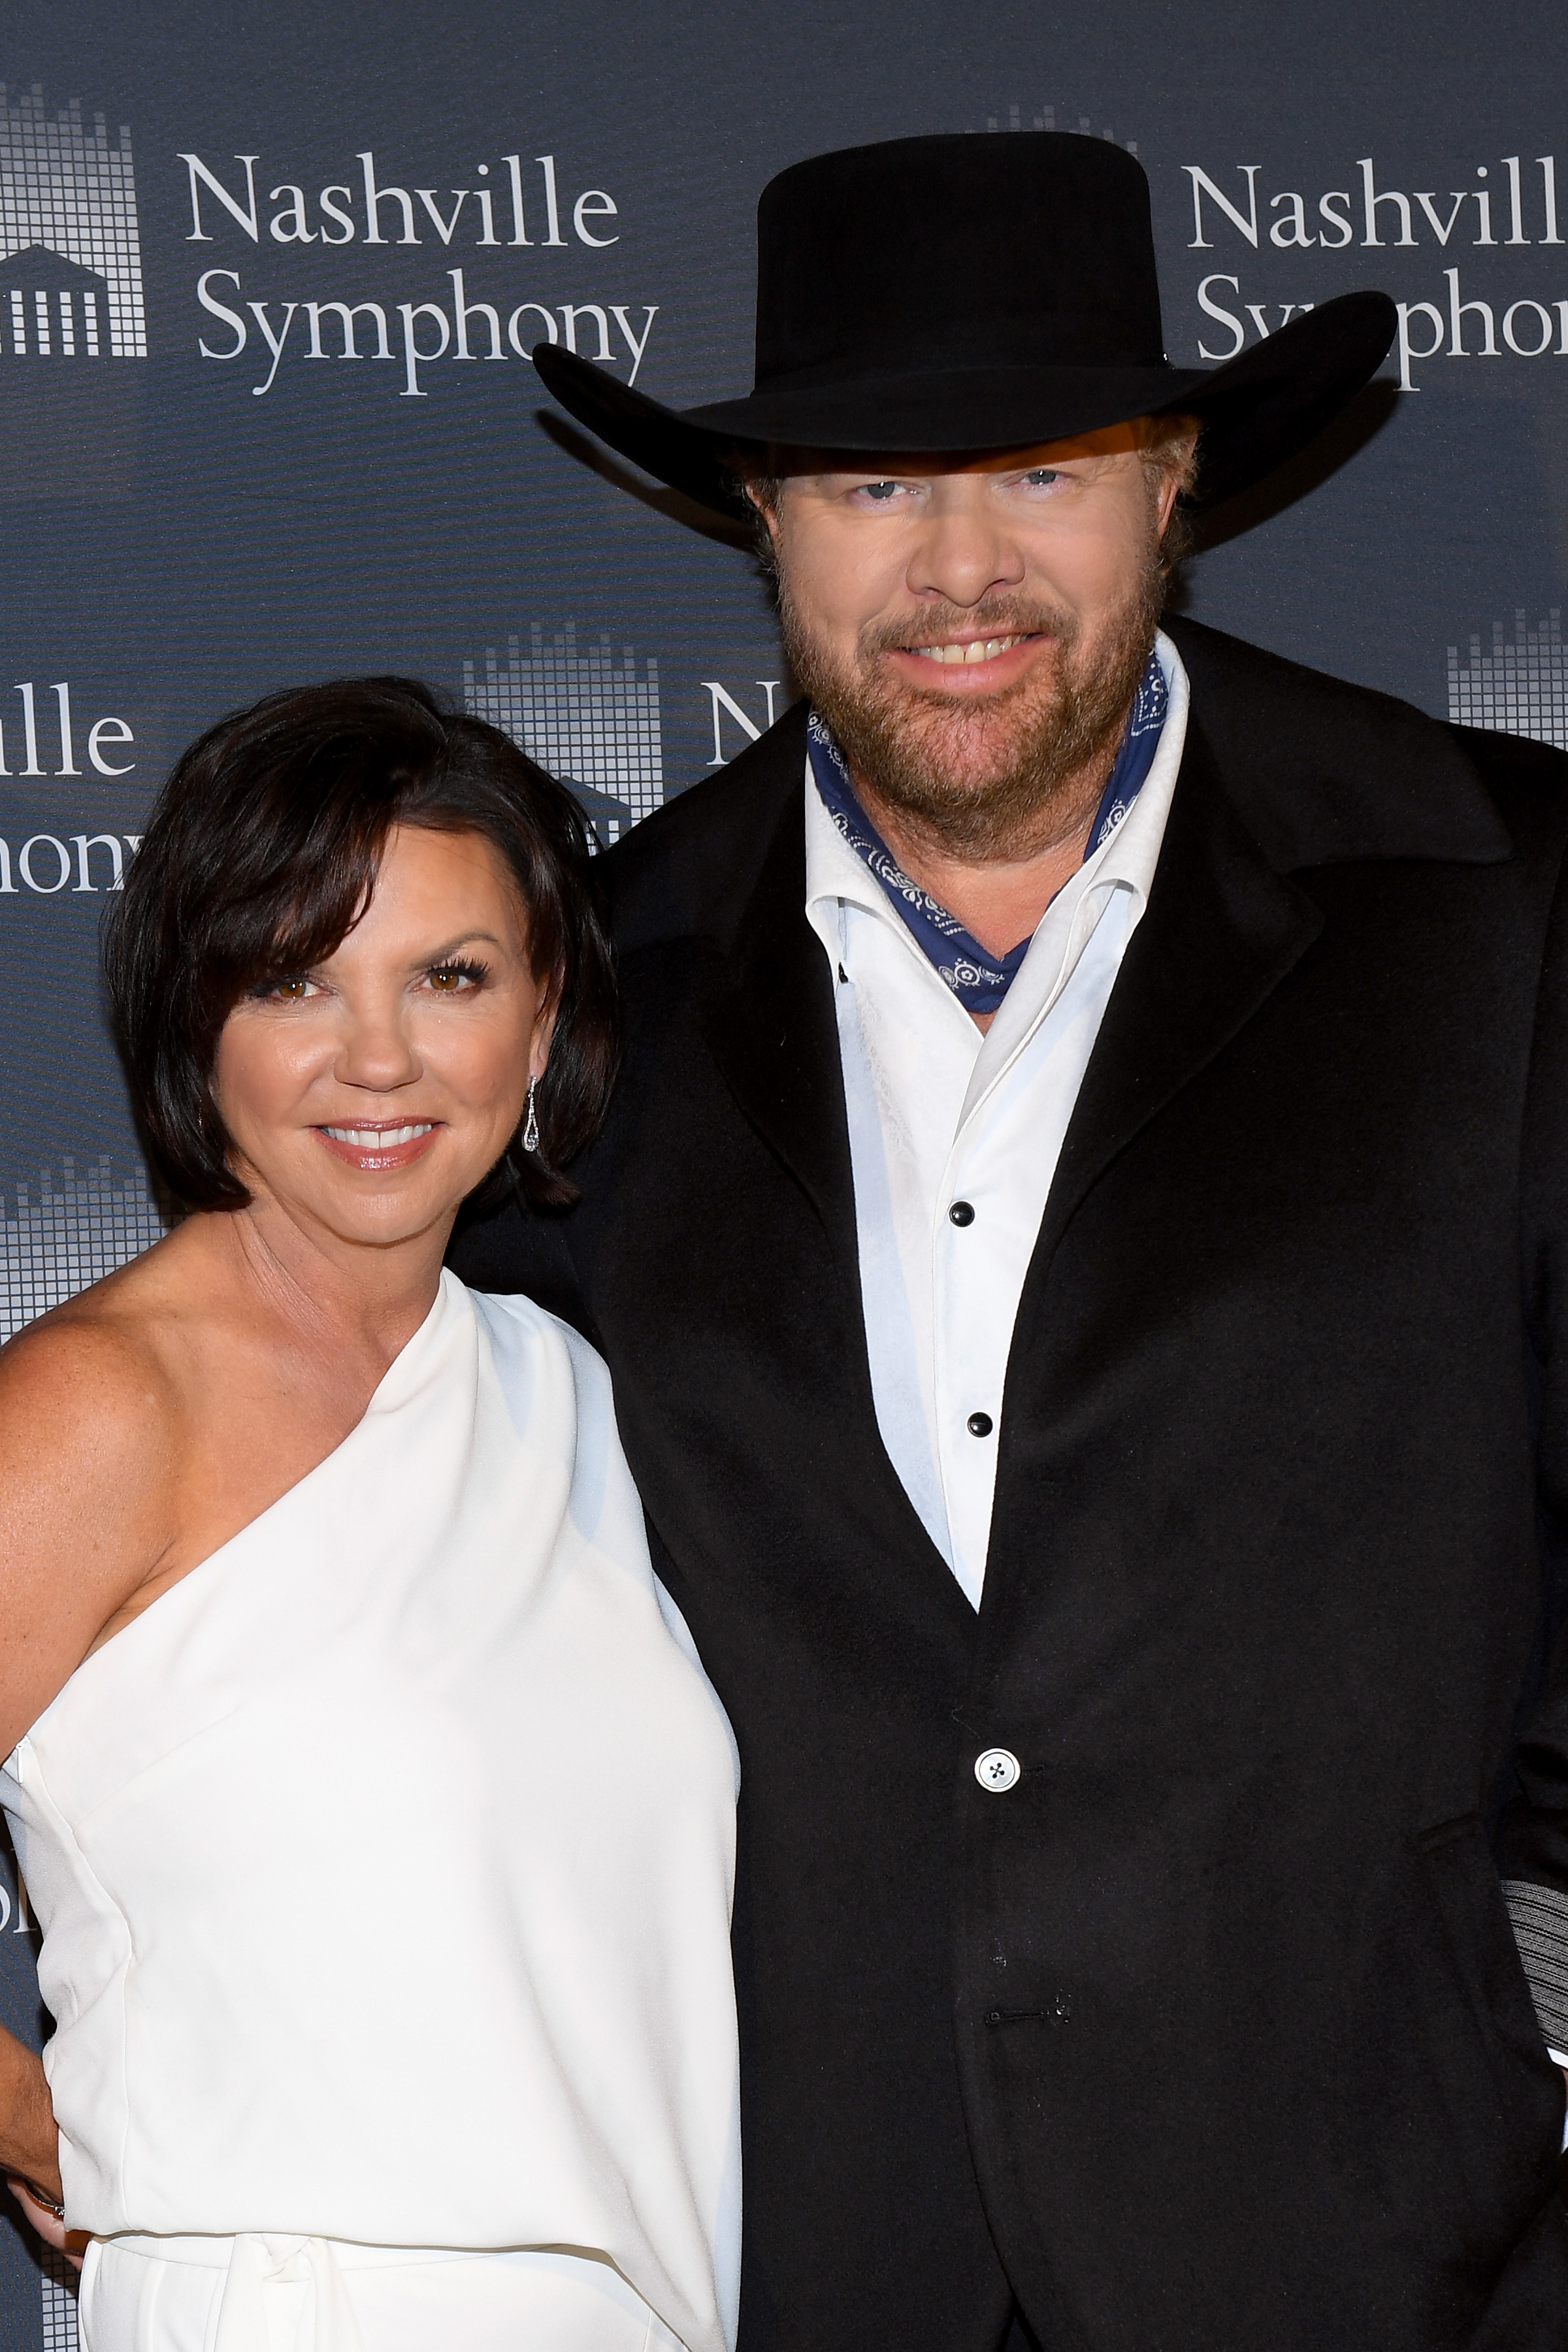 Tricia Lucus and Toby Keith attend the 34th Annual Nashville Symphony Ball at Schermerhorn Symphony Center on December 8, 2018, in Nashville, Tennessee. | Source: Getty Images